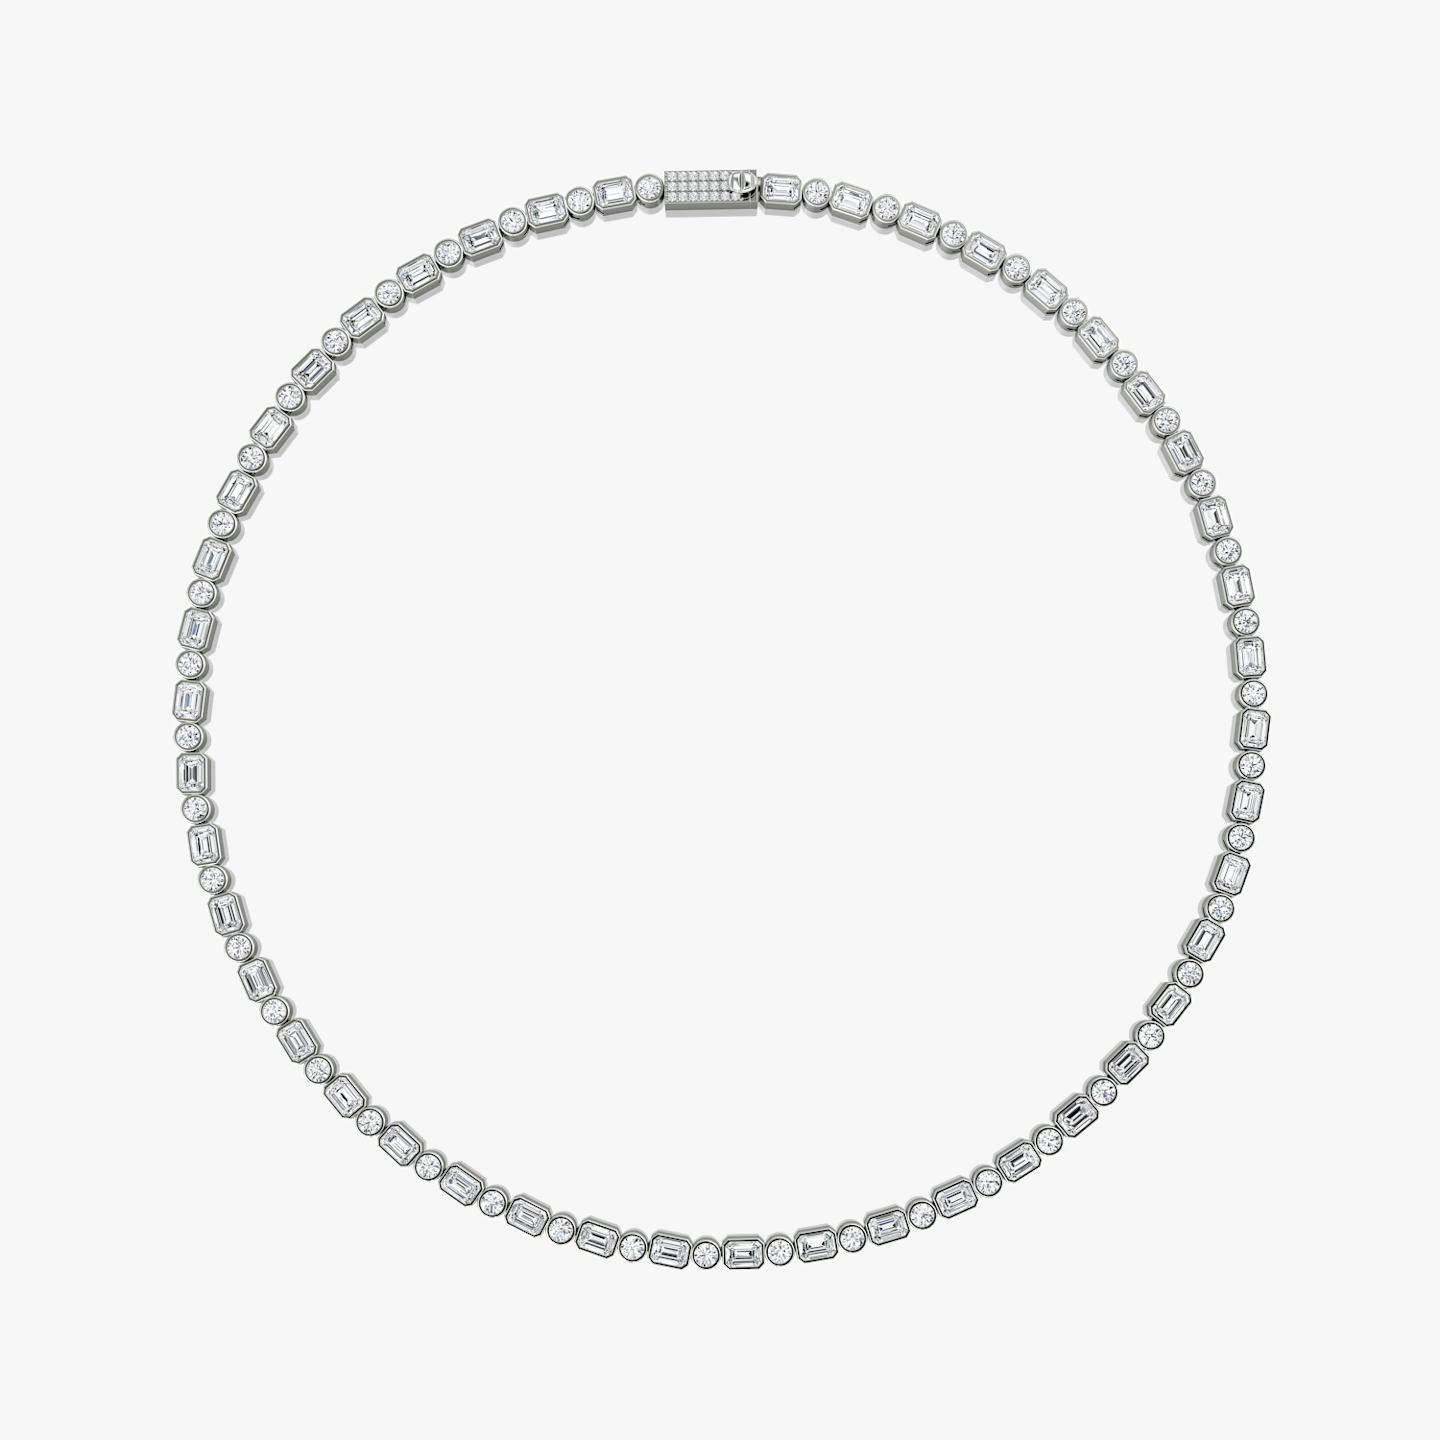 Mixed Bezel Tennis Necklace | Round Brilliant and Emerald | 14k | 18k White Gold | Chain length: 18